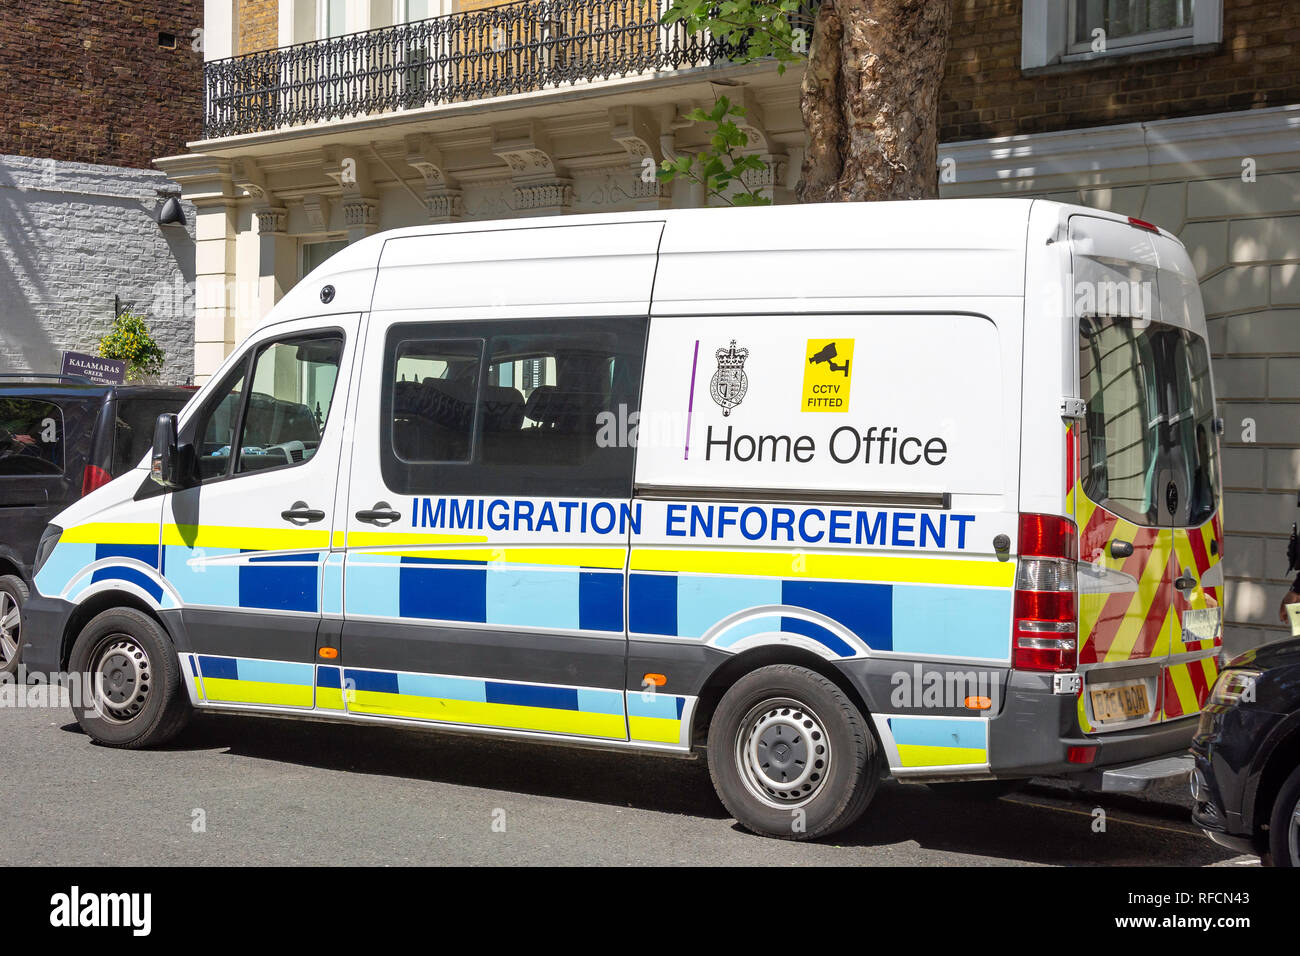 Home Office immigration enforcement van, Bayswater, City of Westminster, Greater London, England, United Kingdom Stock Photo